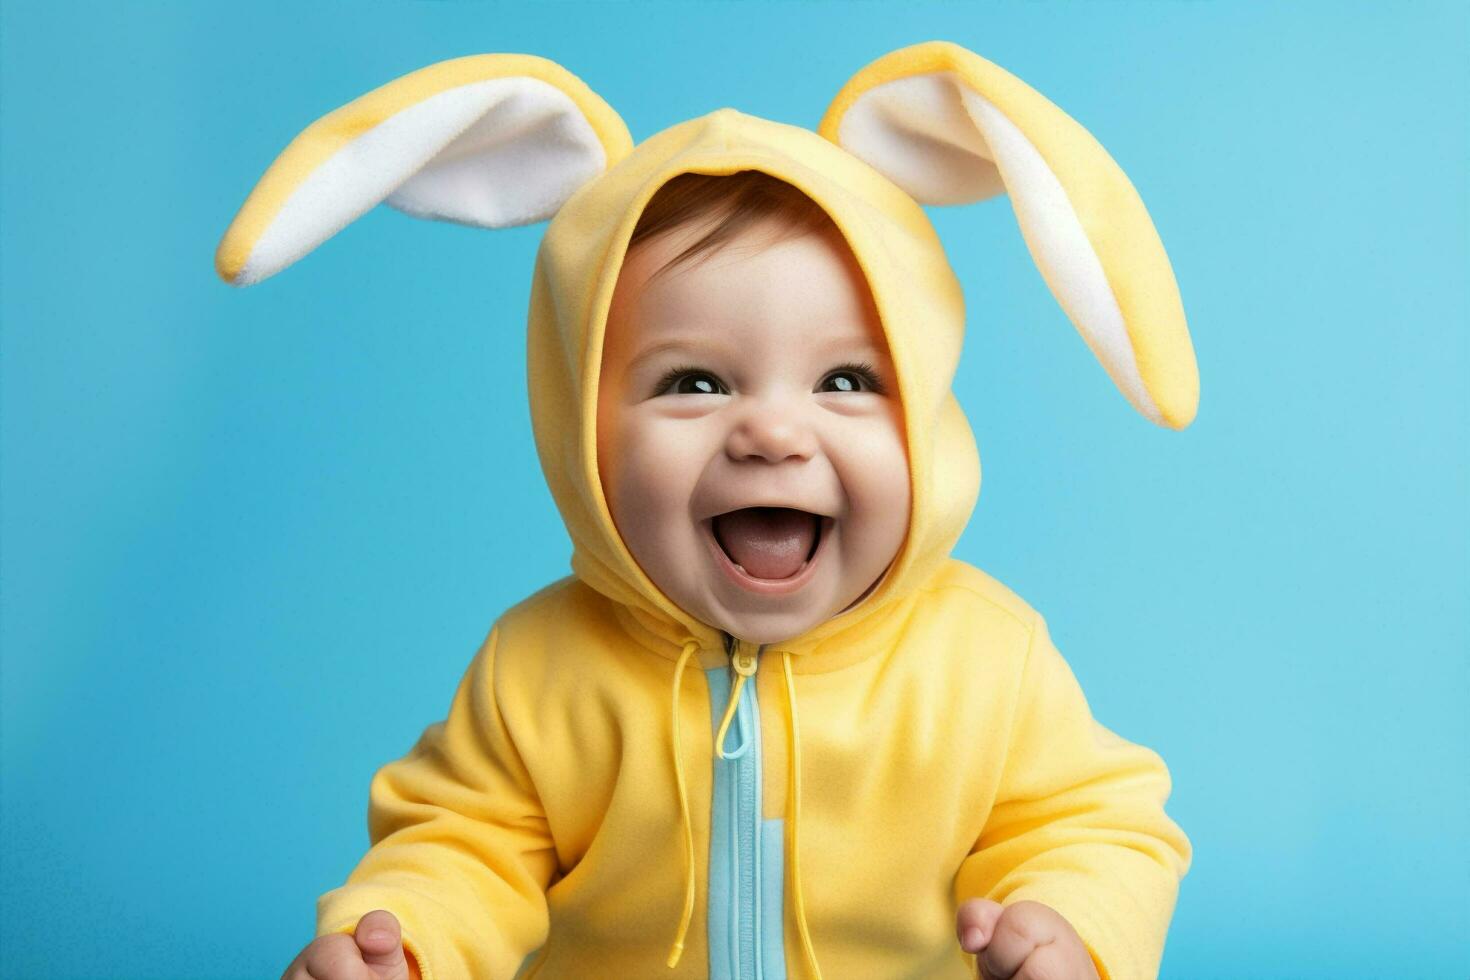 Infant lying portrait rabbit toddler bunny baby fun happy cute spring easter child sweet photo